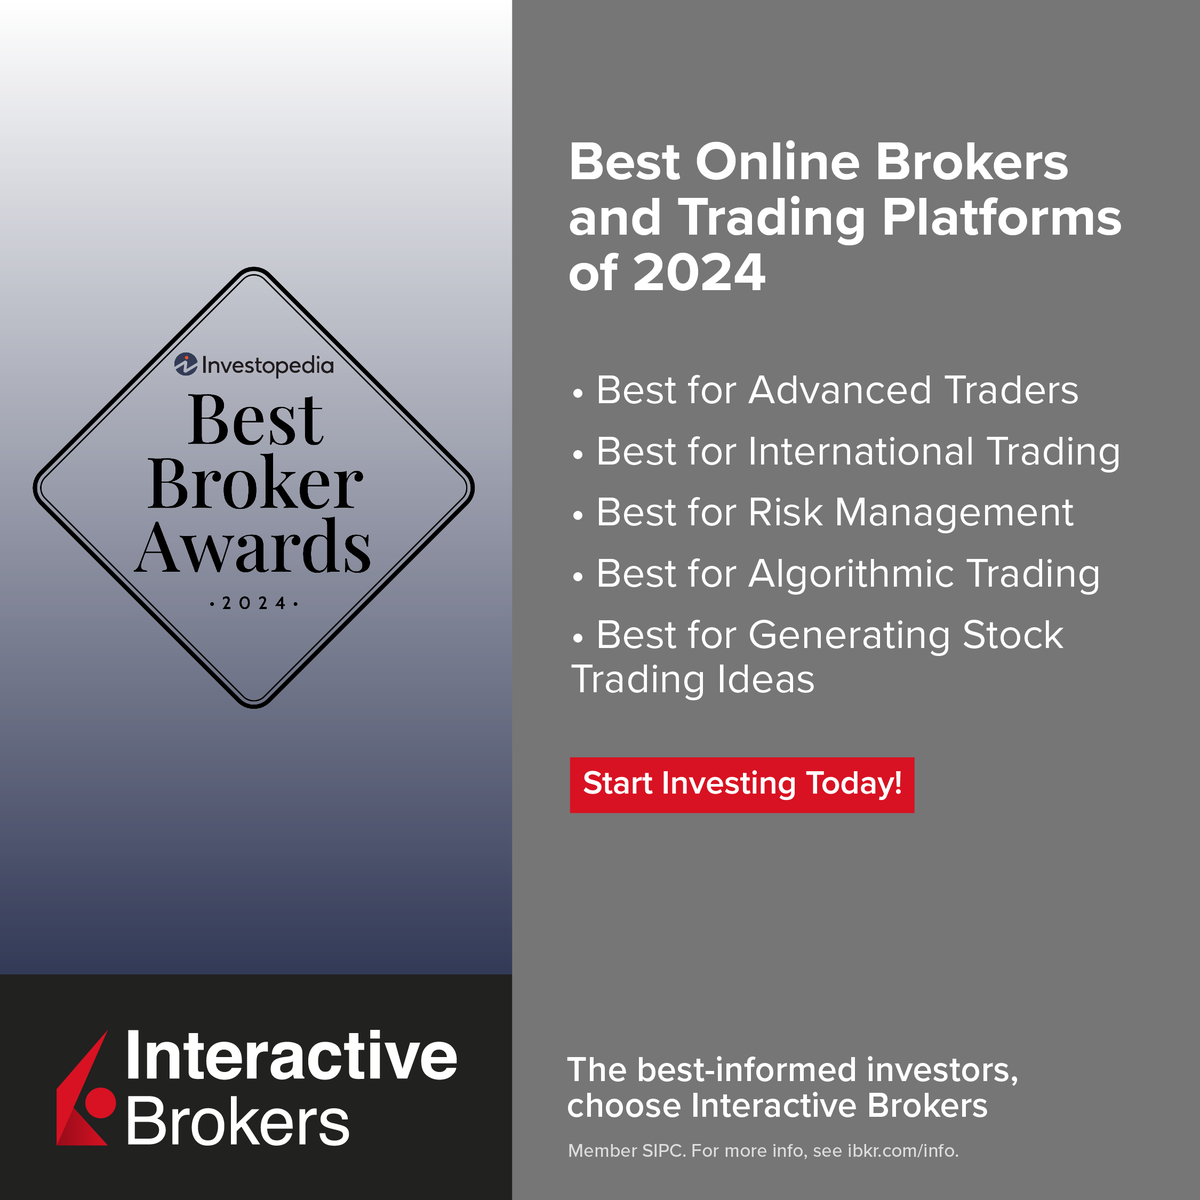 Proud to be #1 for Advanced, International, Algorithmic Trading, and more in @Investopedia’s 2024 rankings! Learn more at spr.ly/whyibt